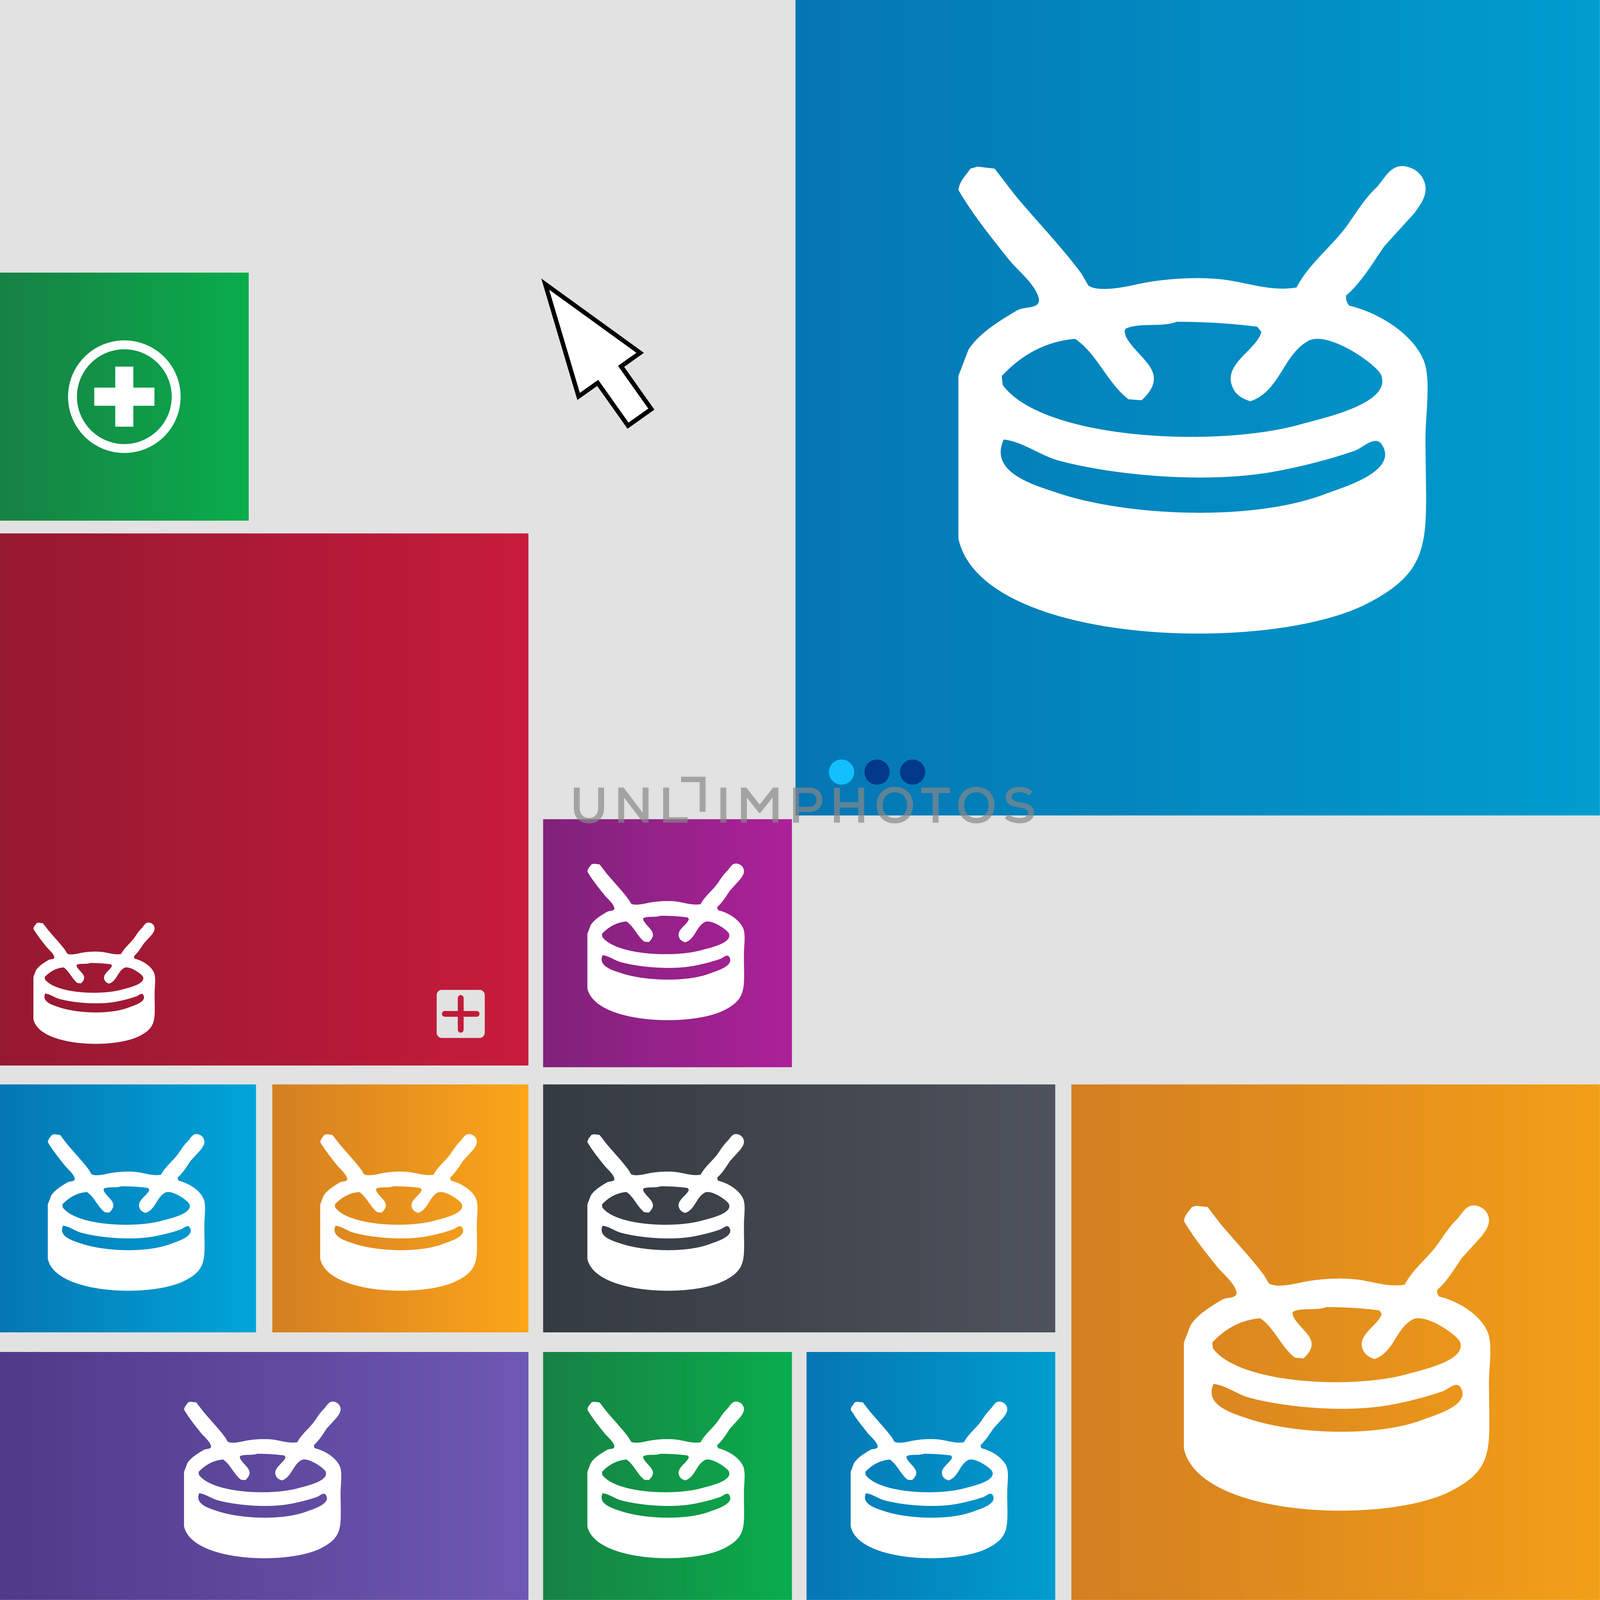 drum icon sign. buttons. Modern interface website buttons with cursor pointer. illustration